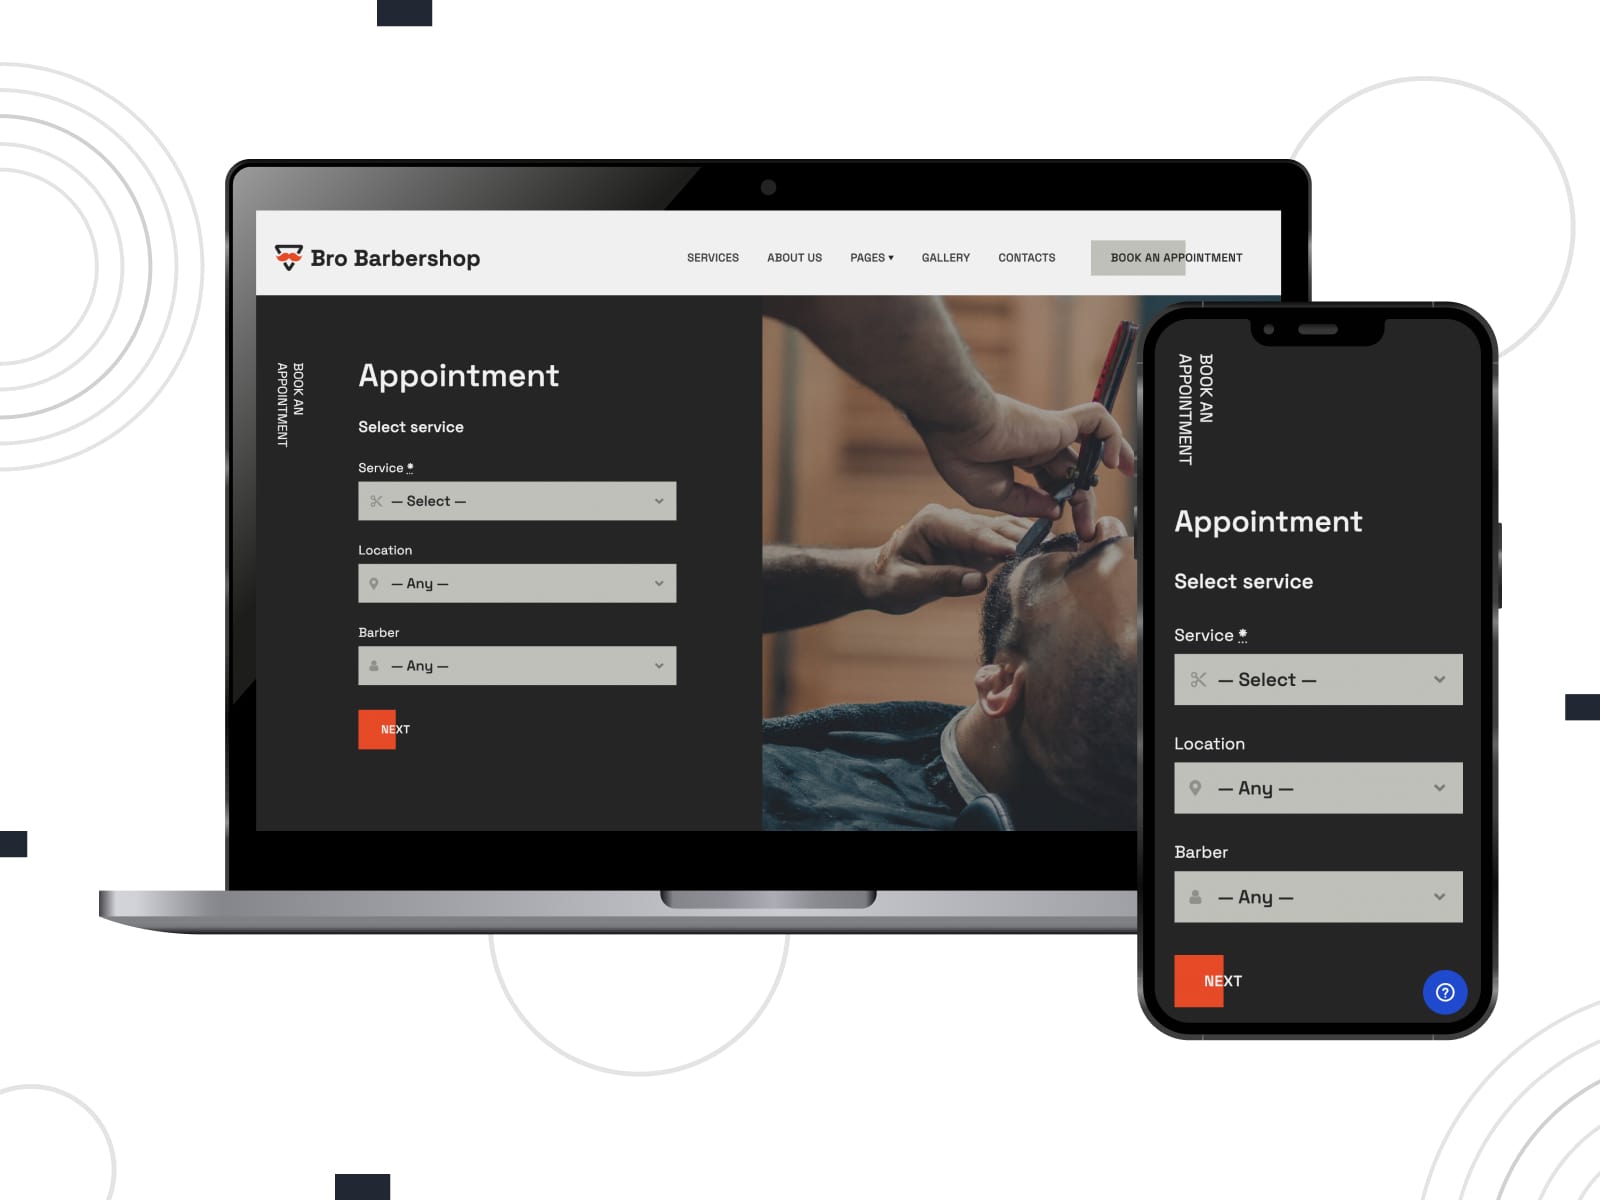 Picture of Bro Barbershop, a free and responsive barbershop website design with appointment booking functionality.